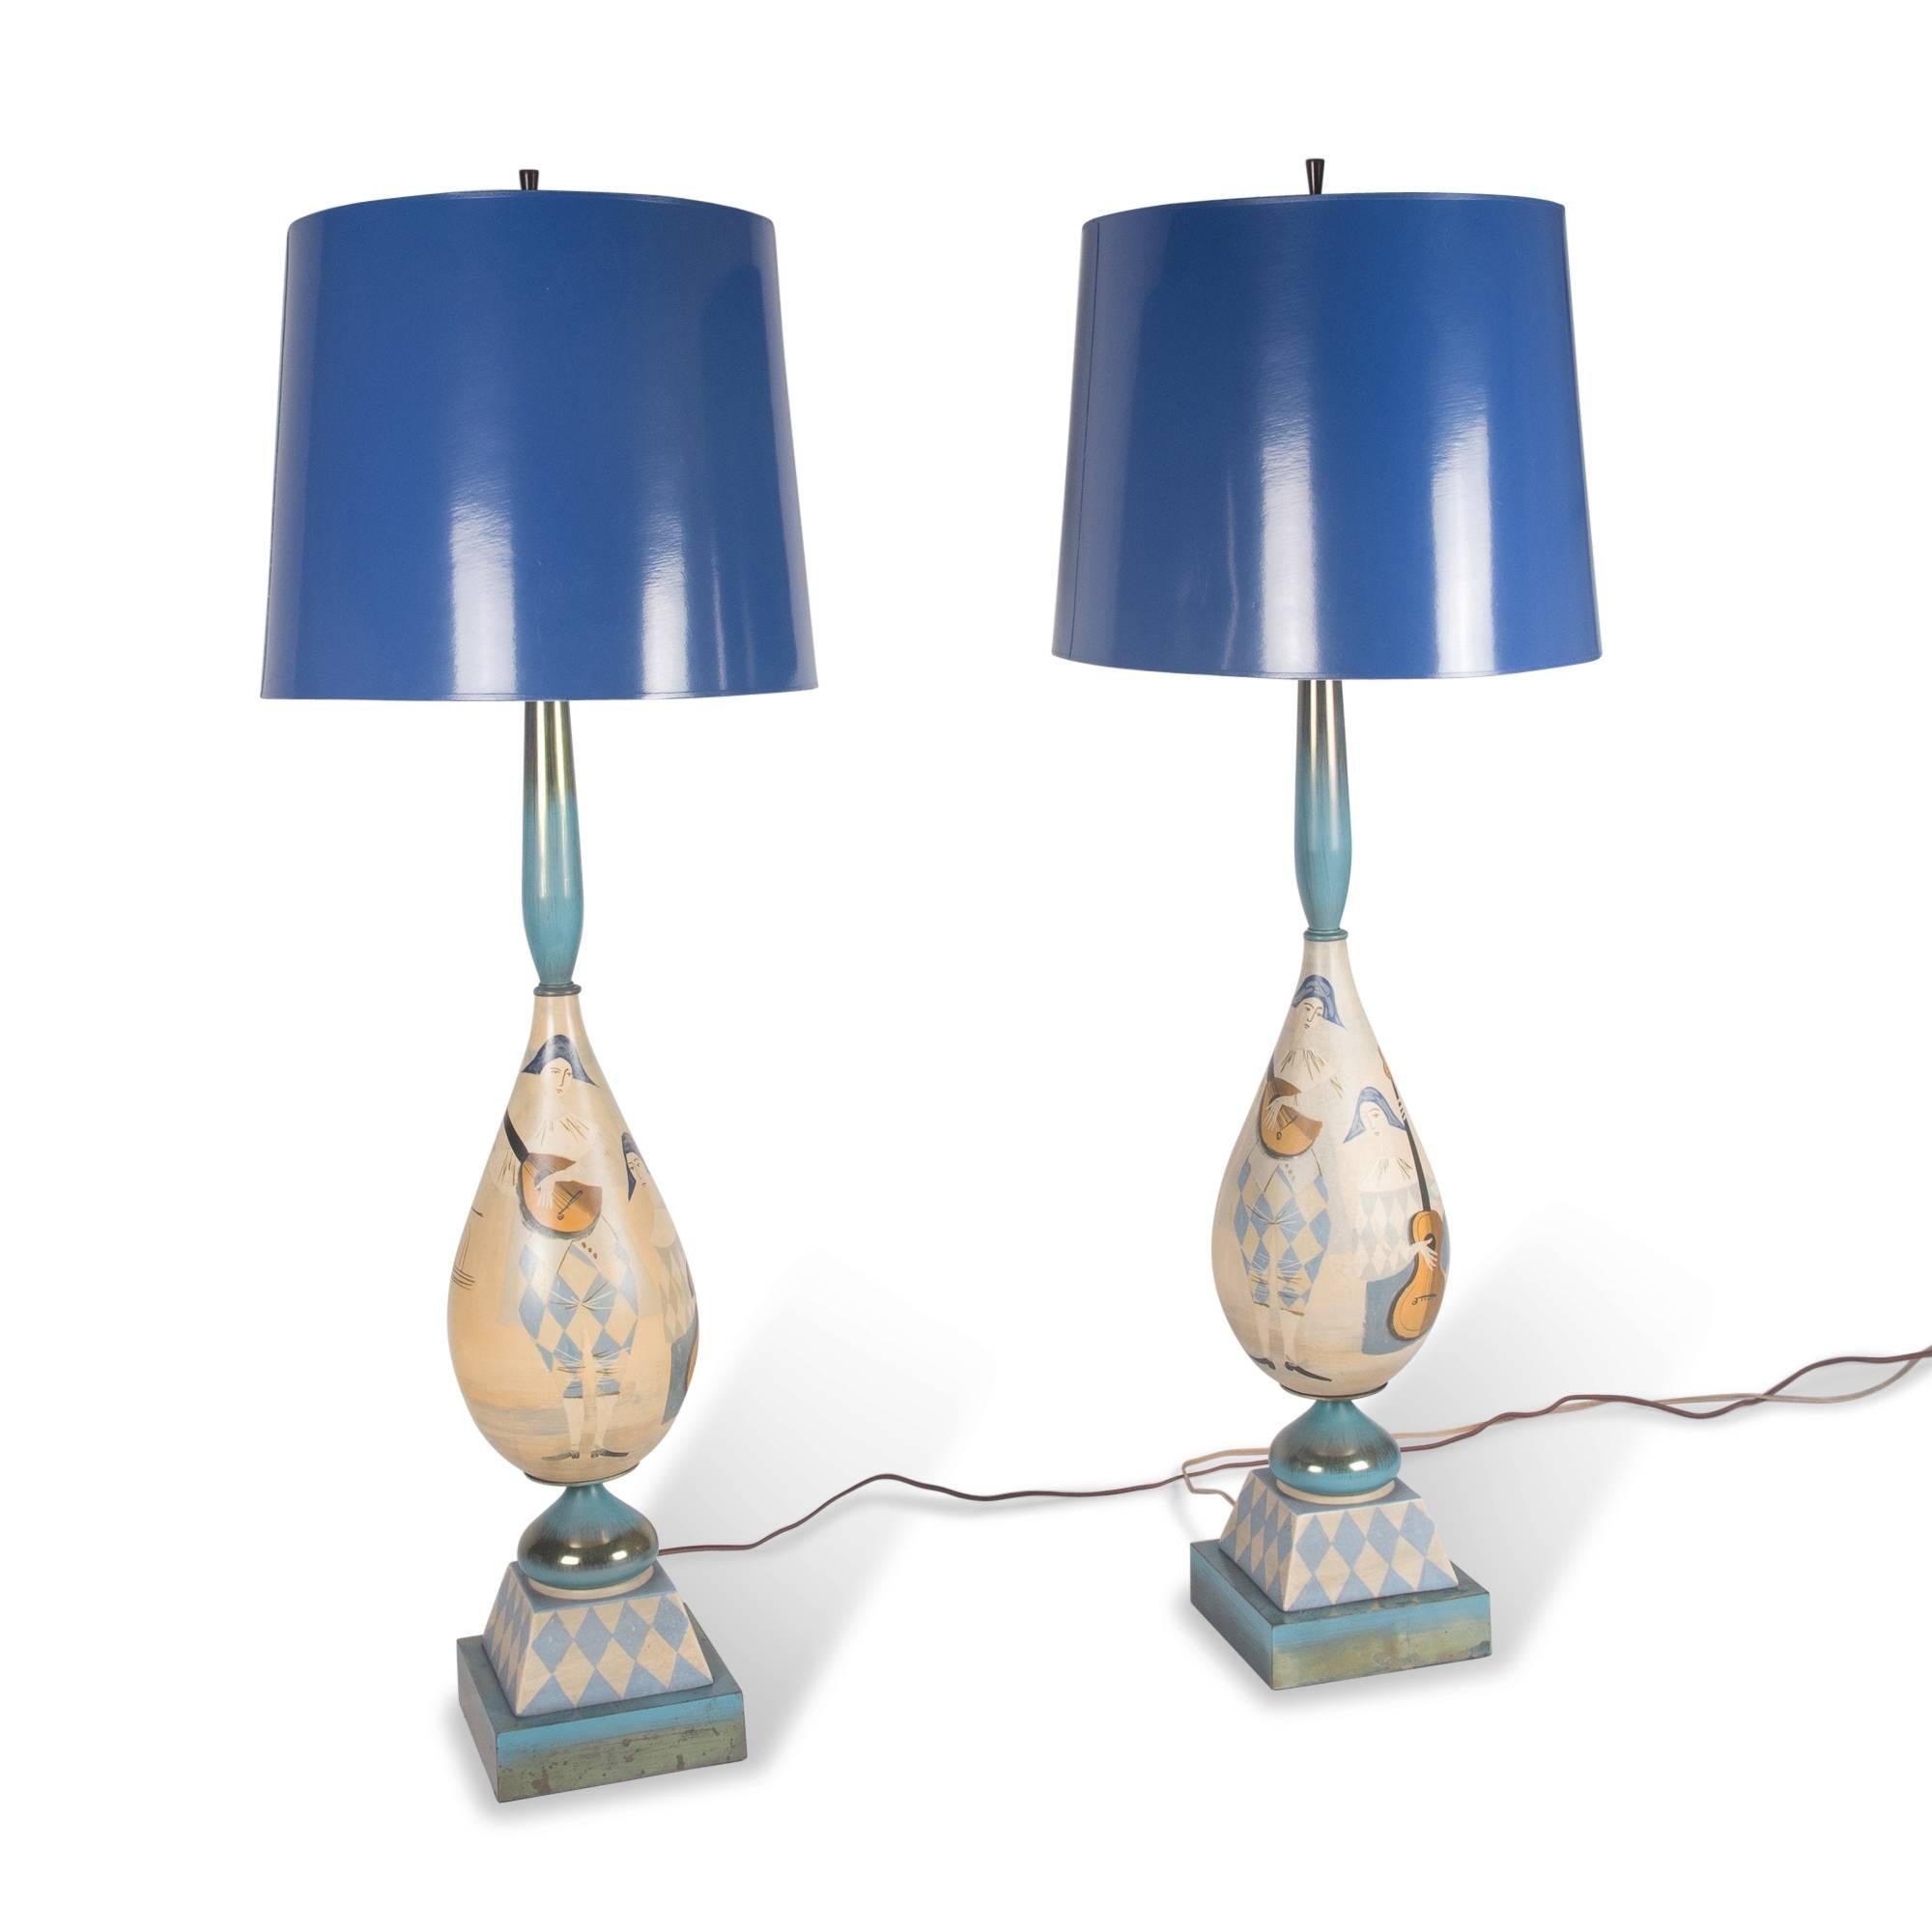 Italian Hand-Painted Wood Table Lamps, 1930s For Sale 1